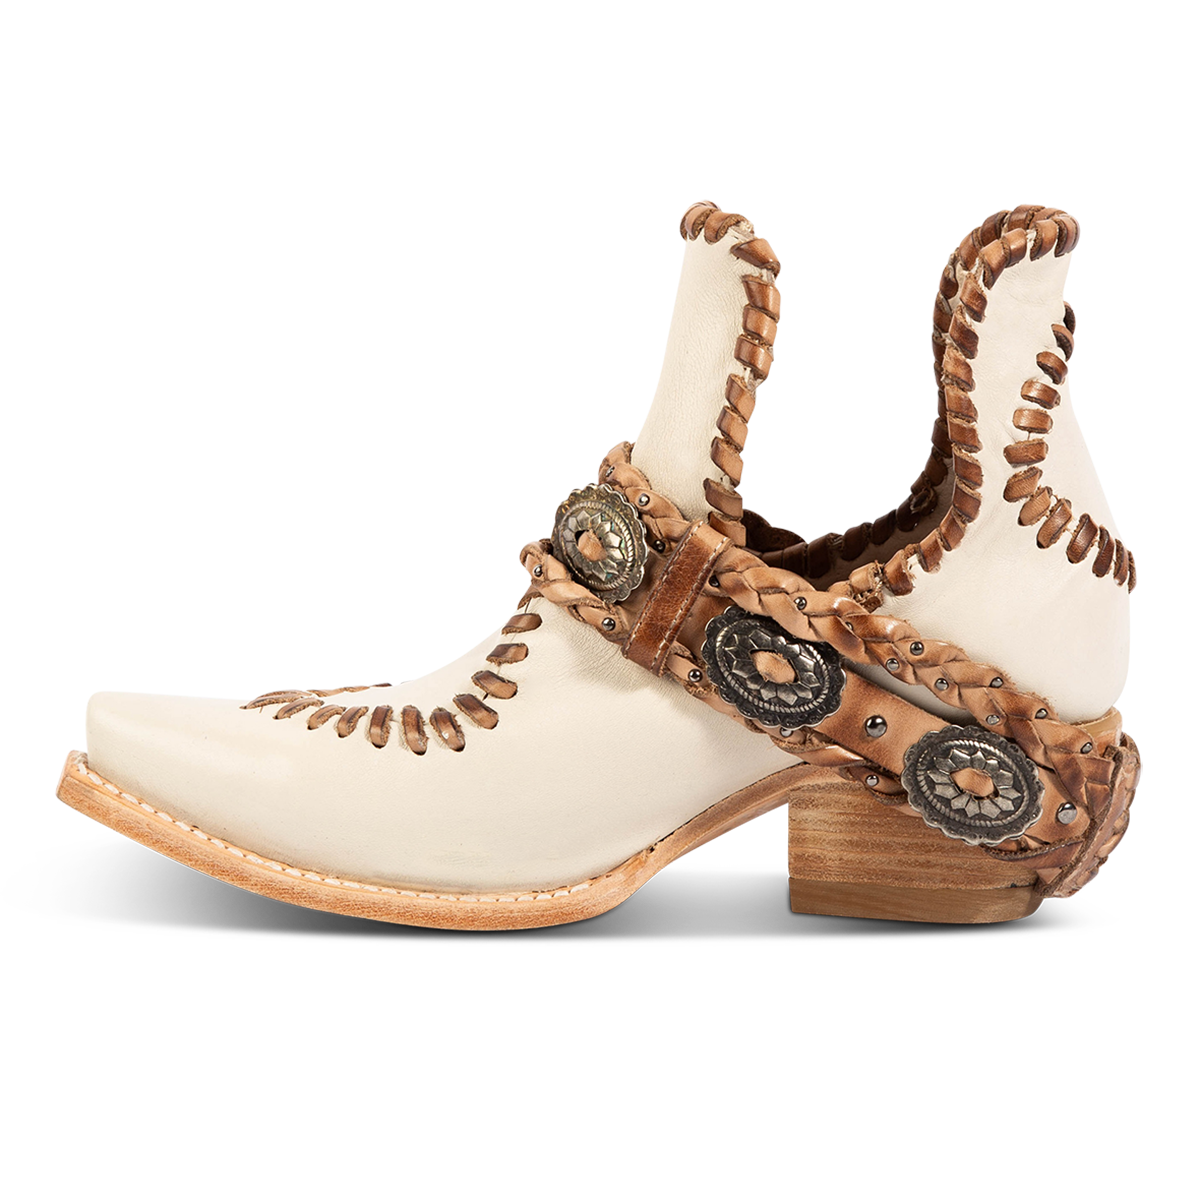 Inside view FREEBIRD women's Whimsical off white leather bootie with a low heel, braided belt and whip stitch detailing